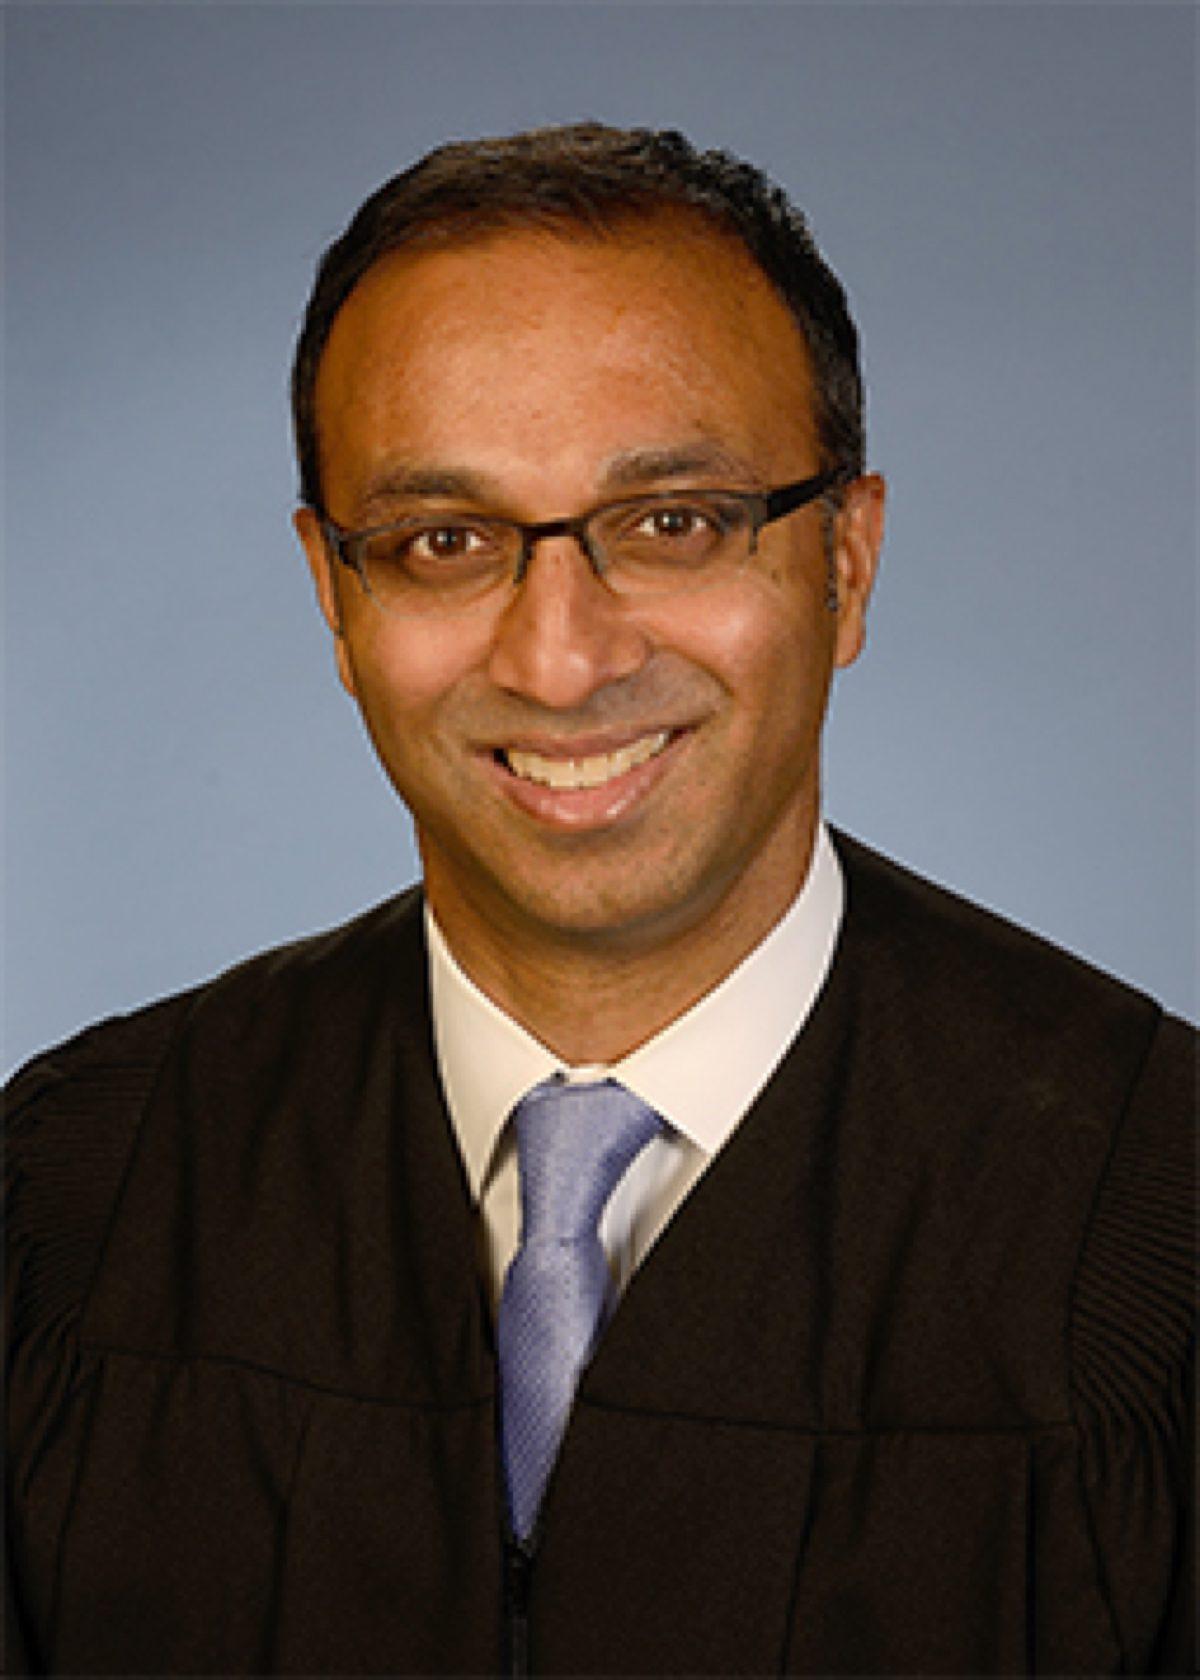 U.S. District Court Judge Amit Metha in a file photo. President Trump noted that Mehta was "an Obama-appointed judge" after Mehta ruled against him on May 20, 2019. (U.S. District Court for the District of Columbia)